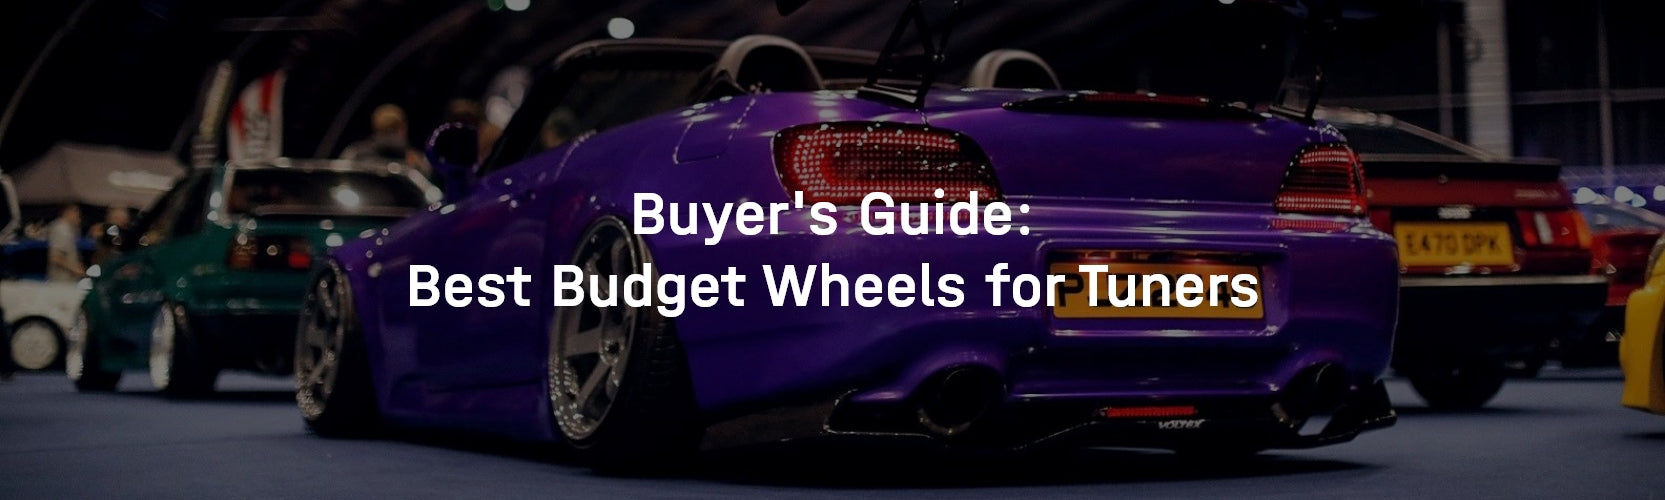 Buyer's Guide: Best Budget Wheels for Tuners